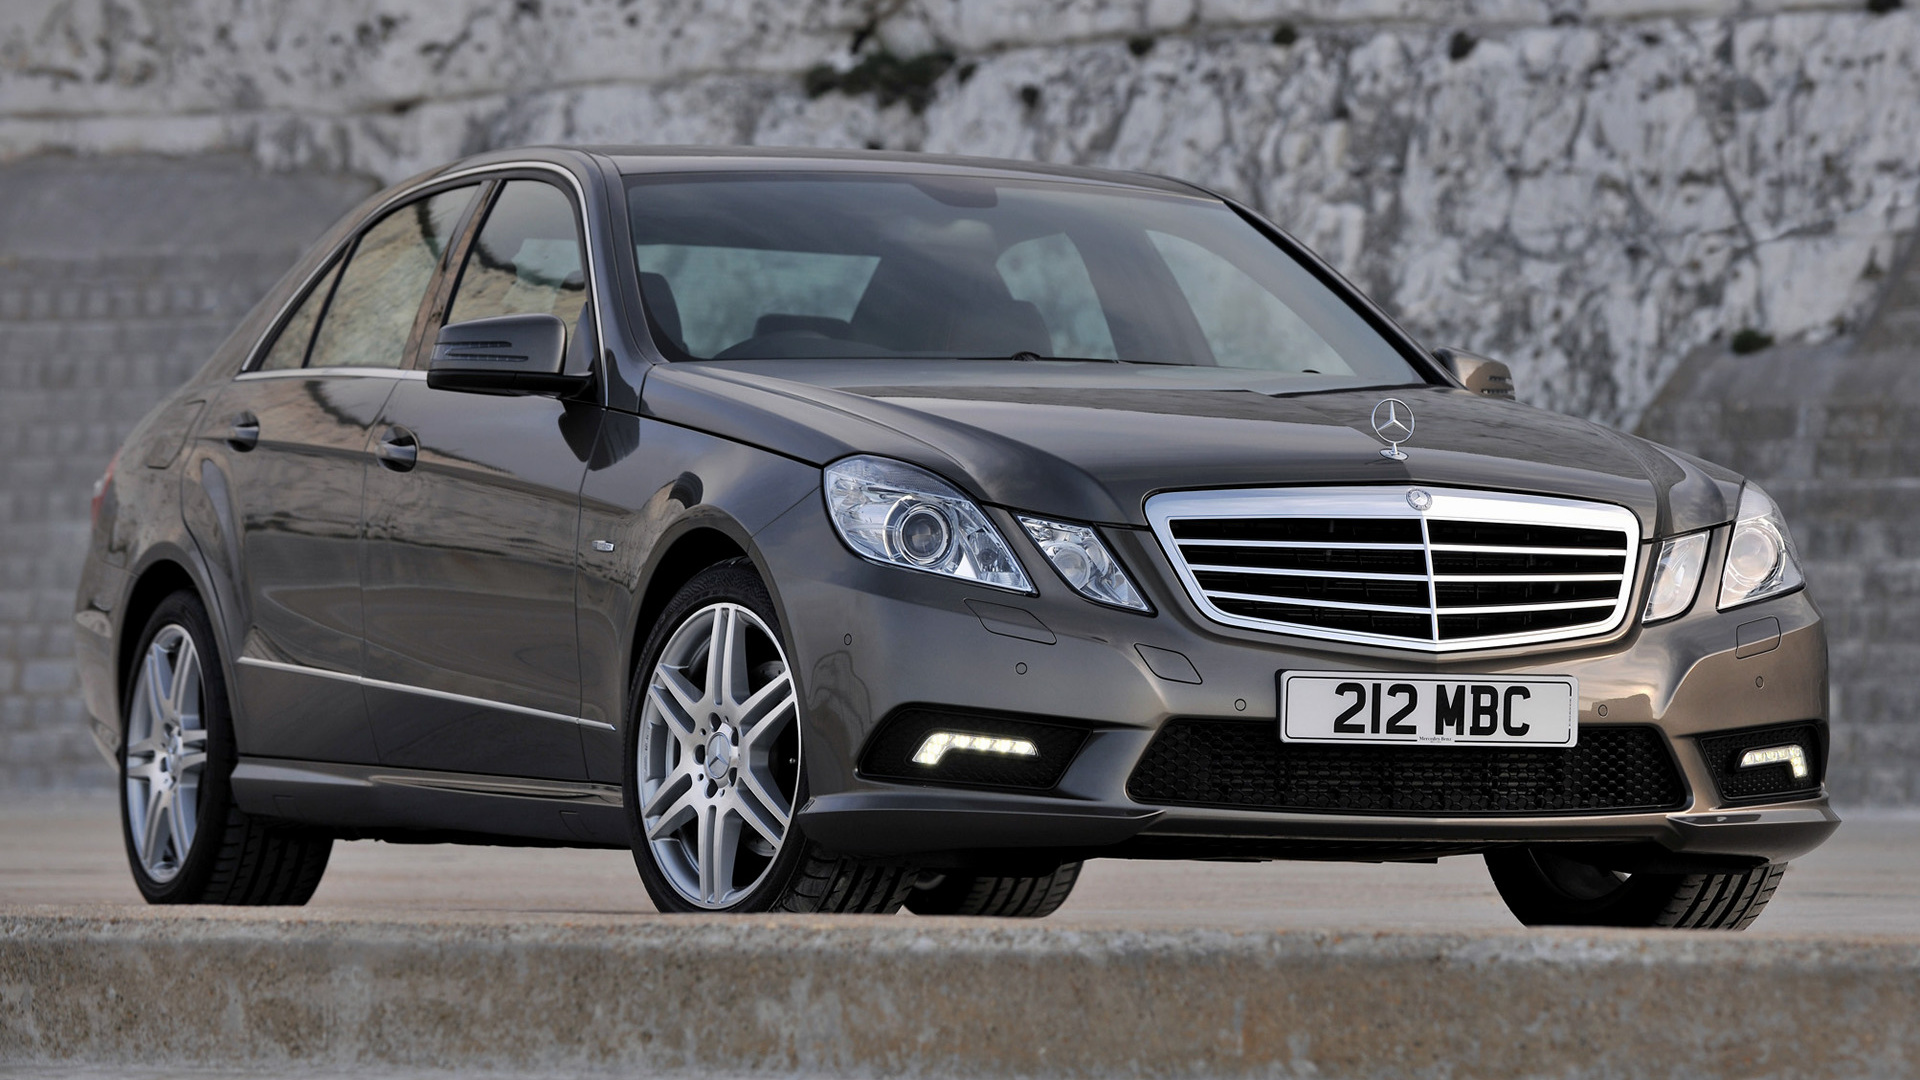 Mercedes-Benz E 220 Cdi Amg Styling Wallpapers